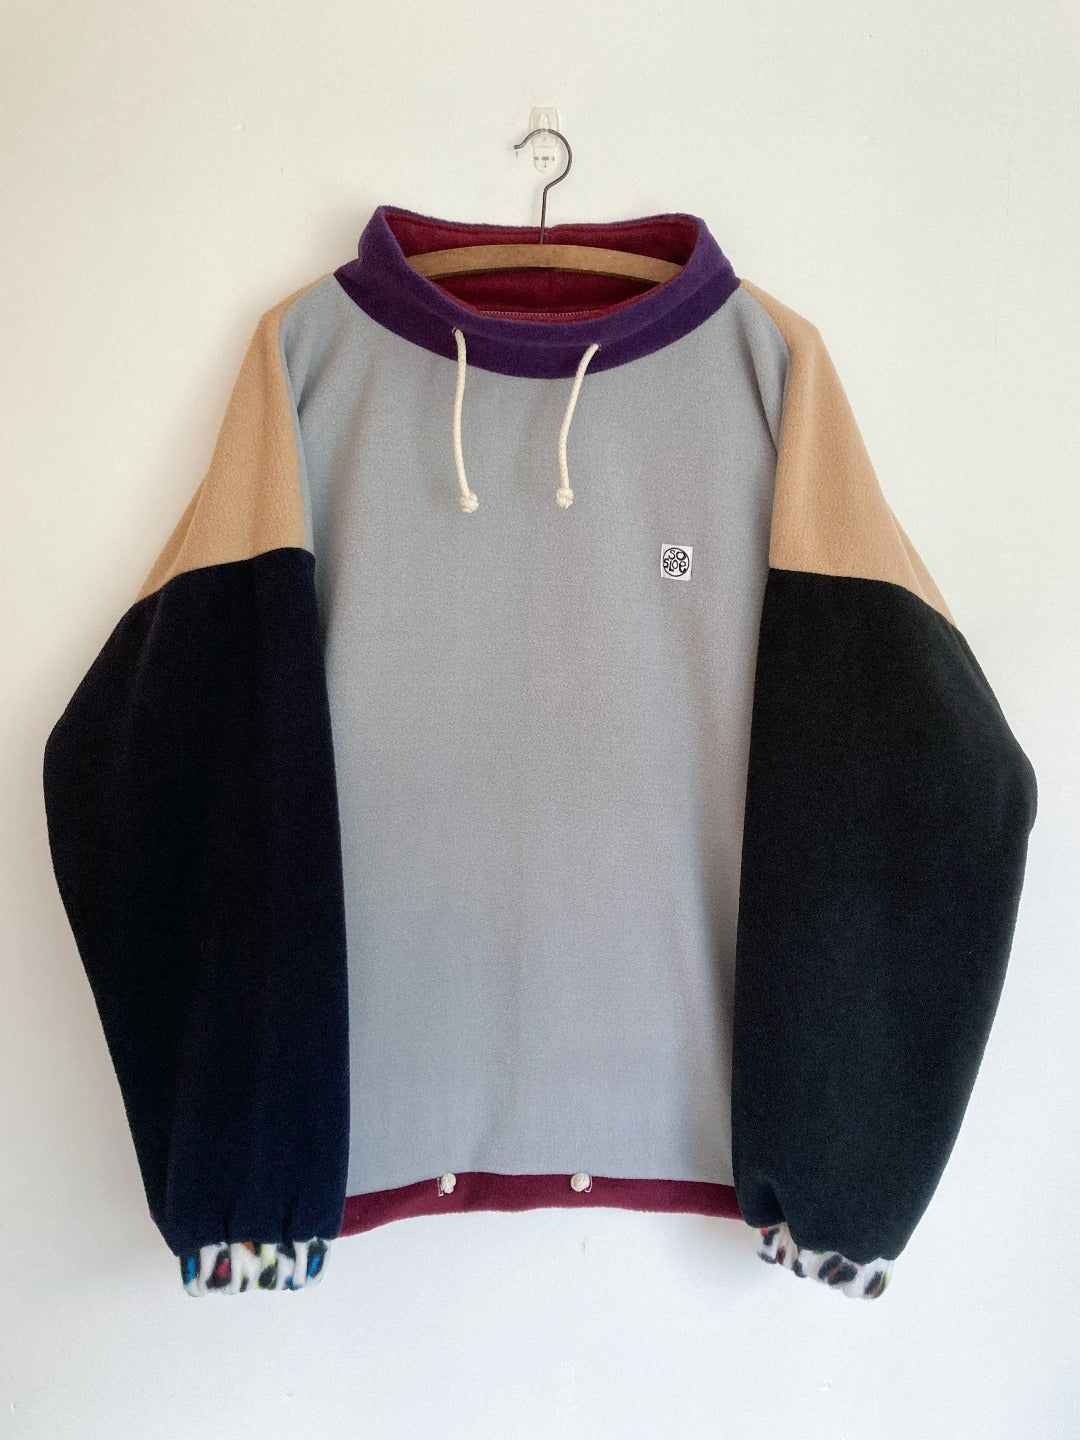 Grey and camel coloured fleece with contrasting sleeves.